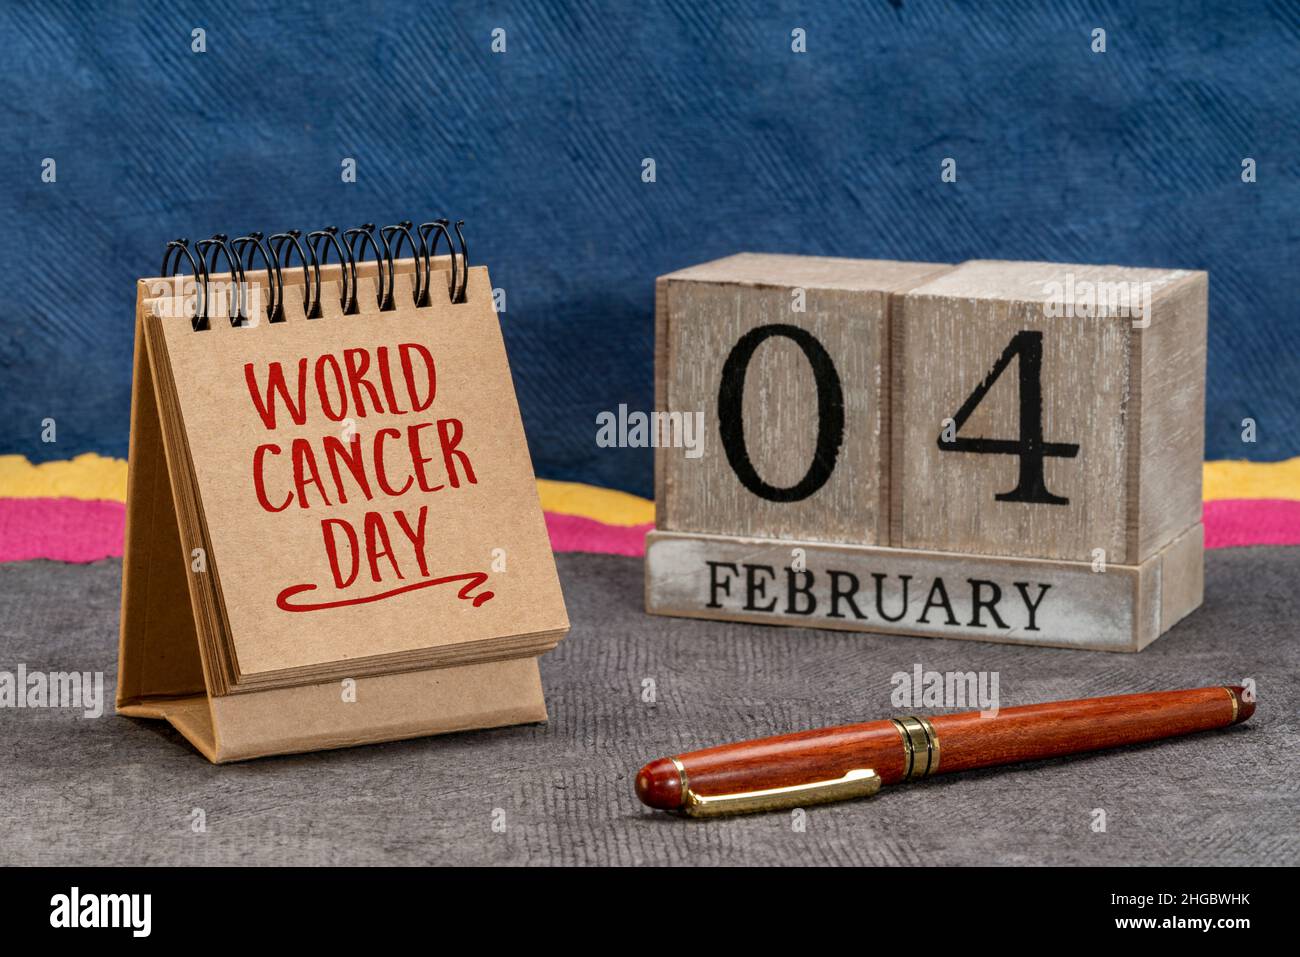 World Cancer Day, February 4 - handwriting and wooden block calendar, event to raise awareness of cancer, its prevention, detection, and treatment Stock Photo